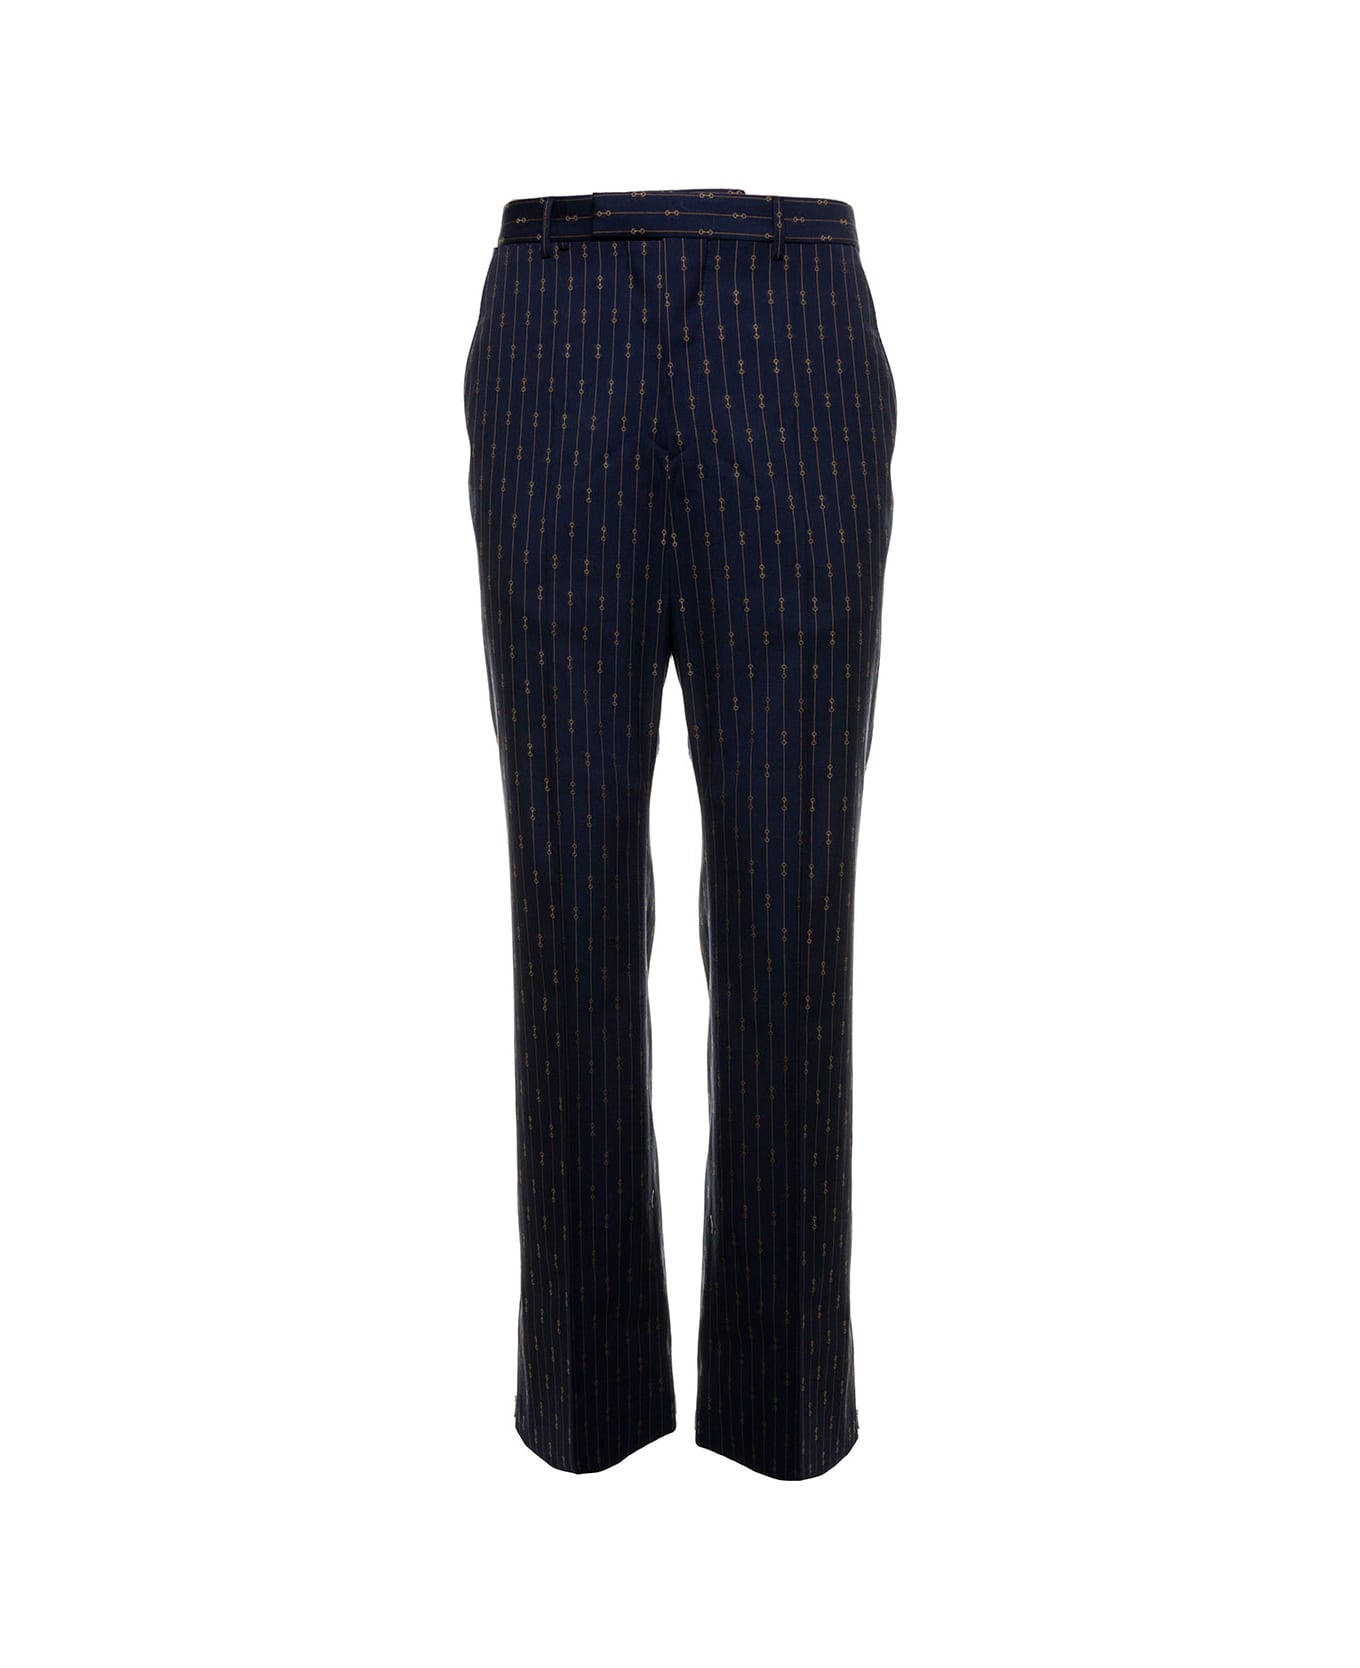 Gucci Man's Blue Wool Tailored Pants With Allover Horsebit Motif - blue ボトムス